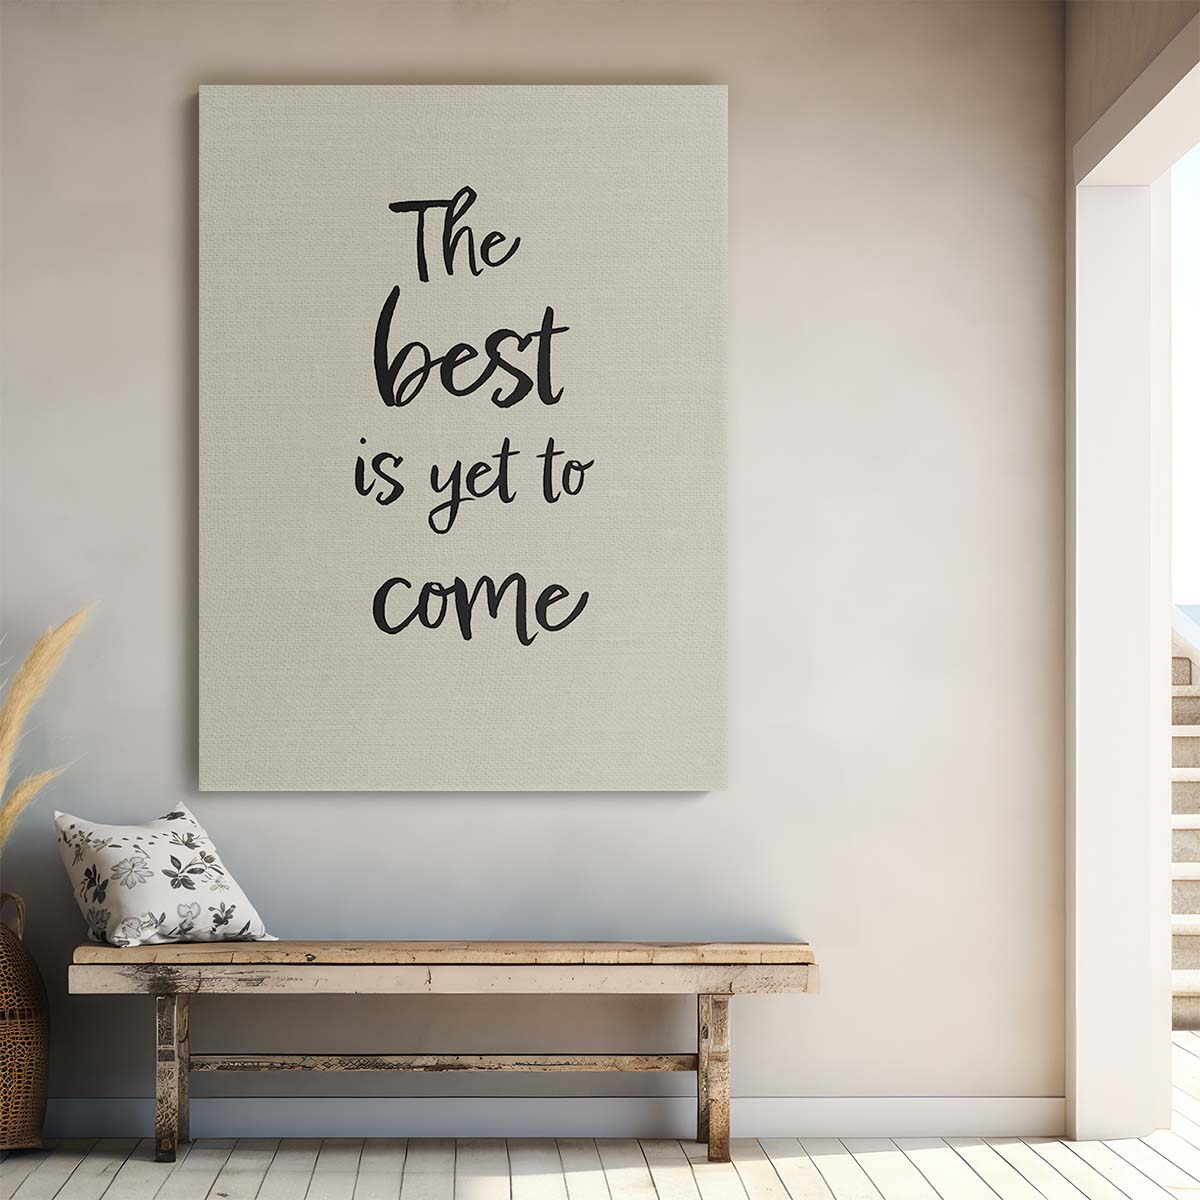 Simple Illustration Quote Art with Beige Background - Motivational by Luxuriance Designs, made in USA